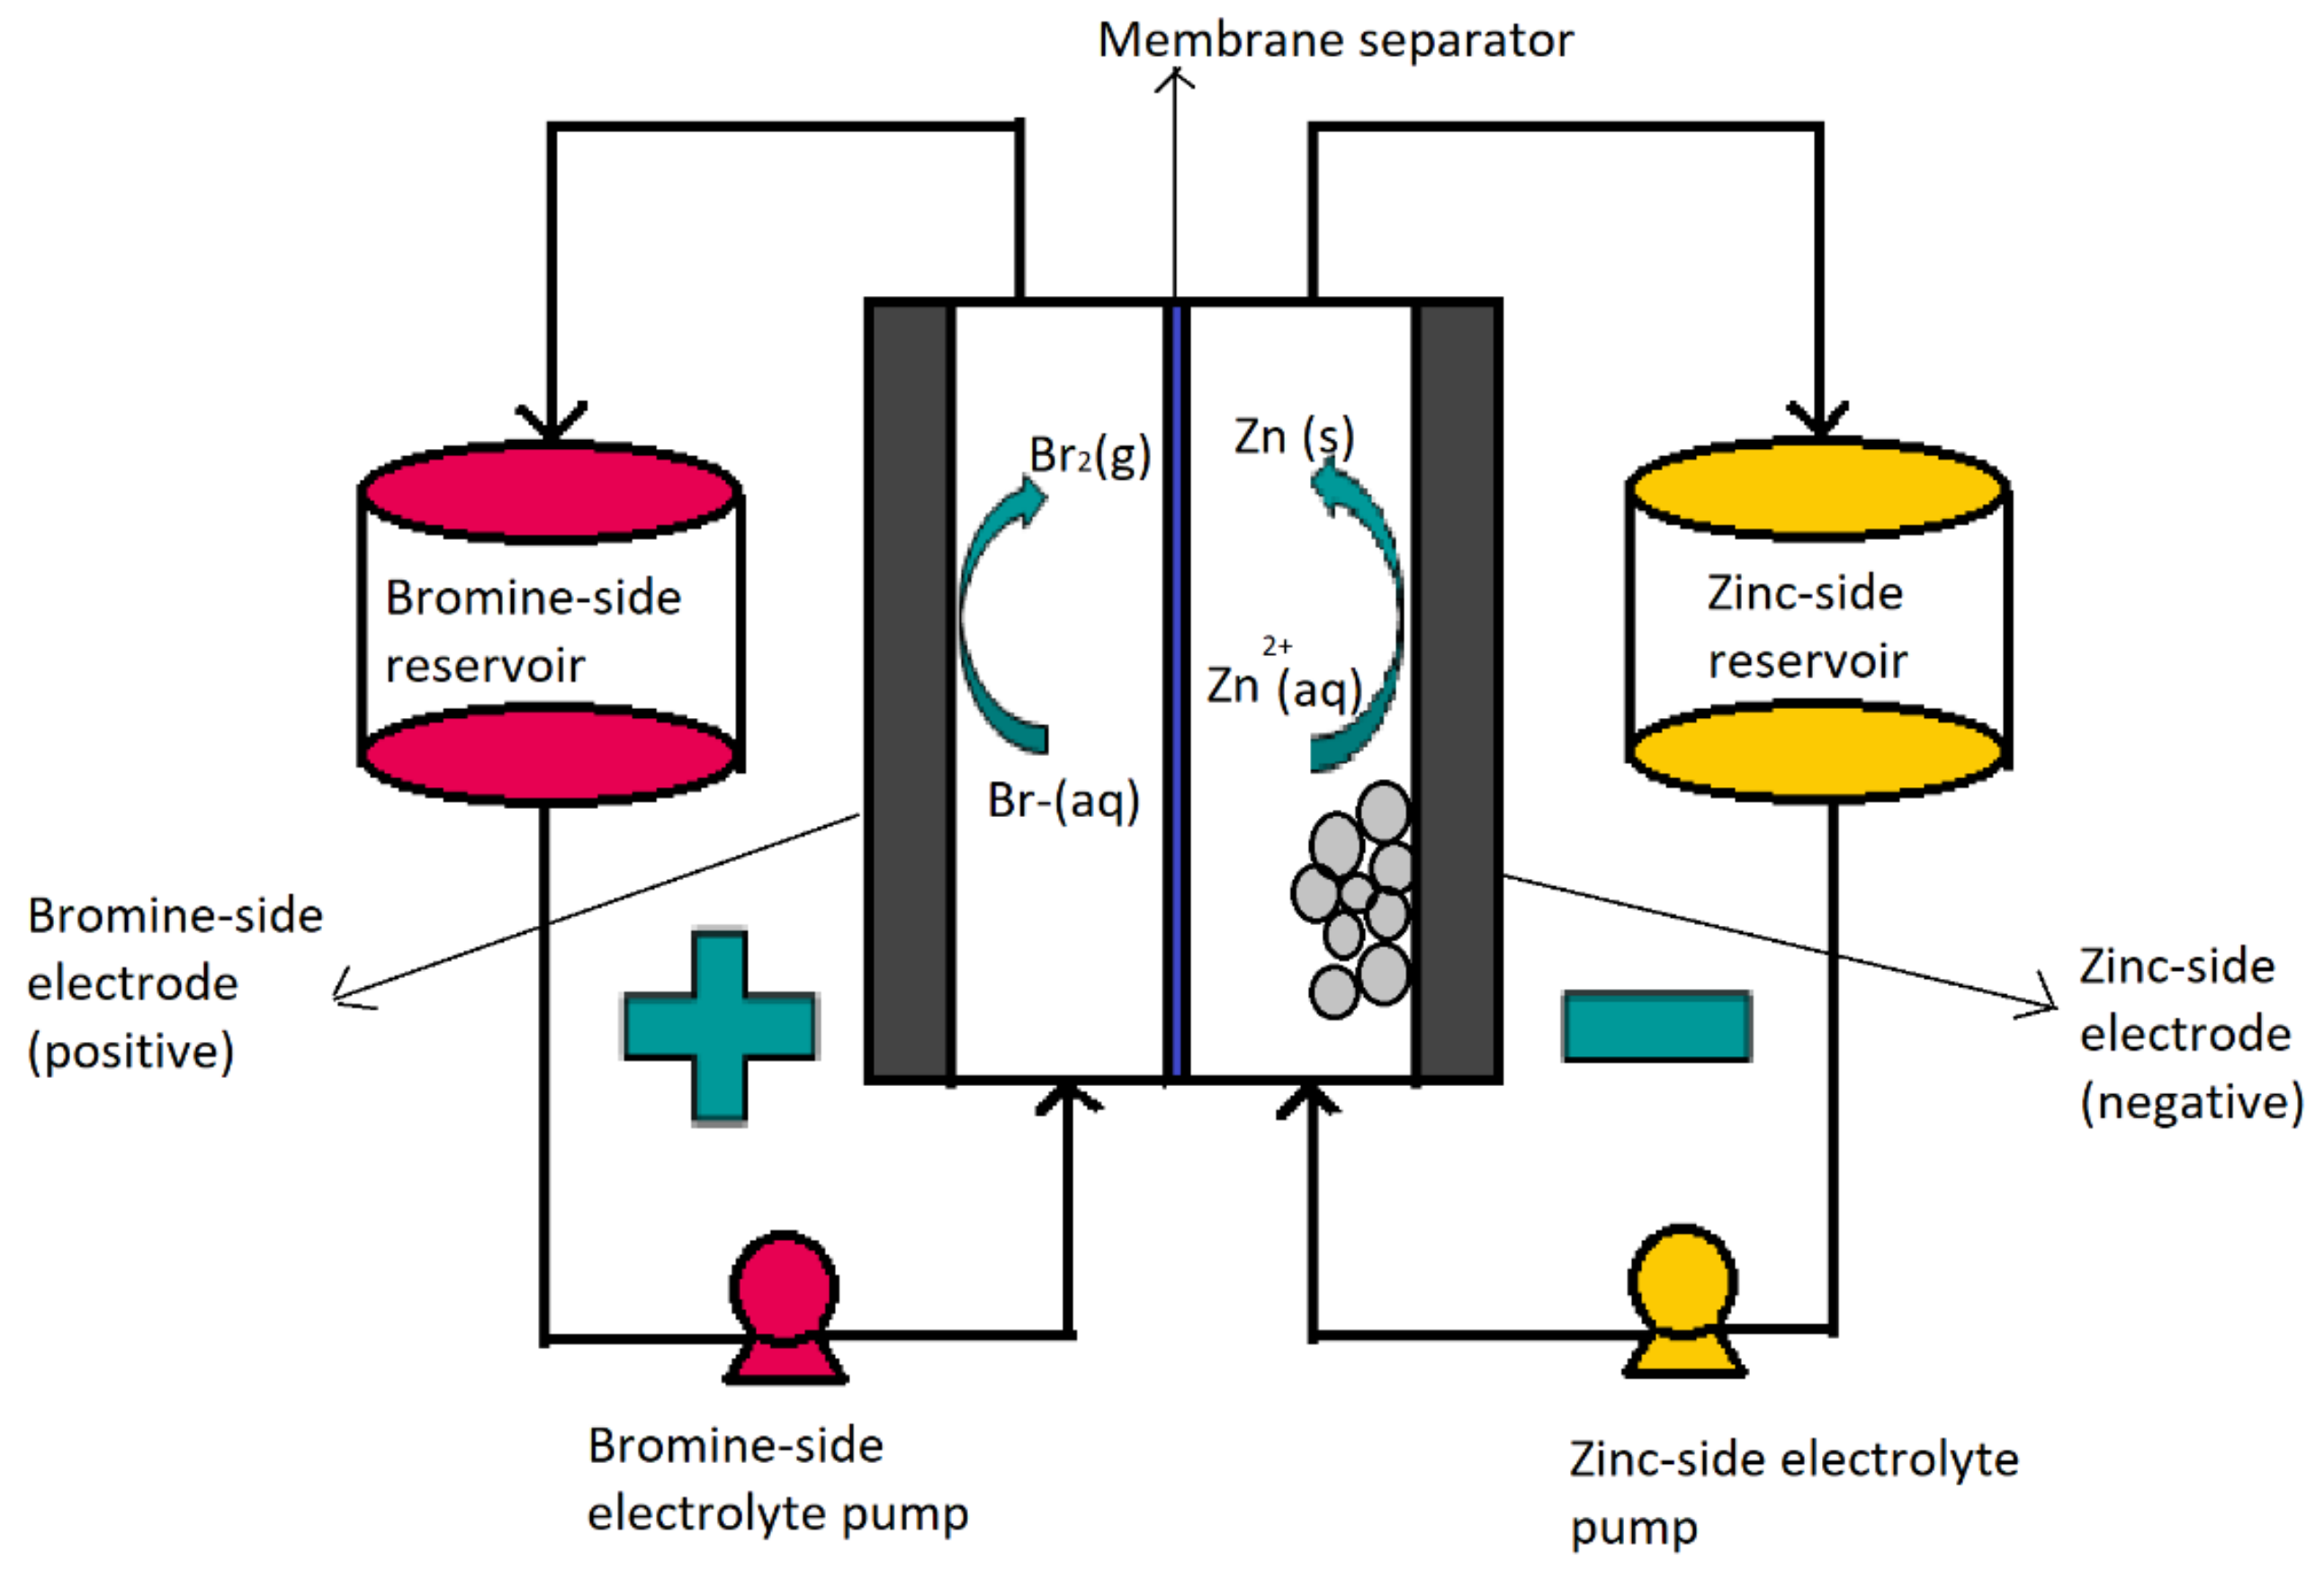 IJMS | Free Full-Text | Enhanced Performance of Zn/Br Flow Battery Using  N-Methyl-N-Propylmorpholinium Bromide as Complexing Agent